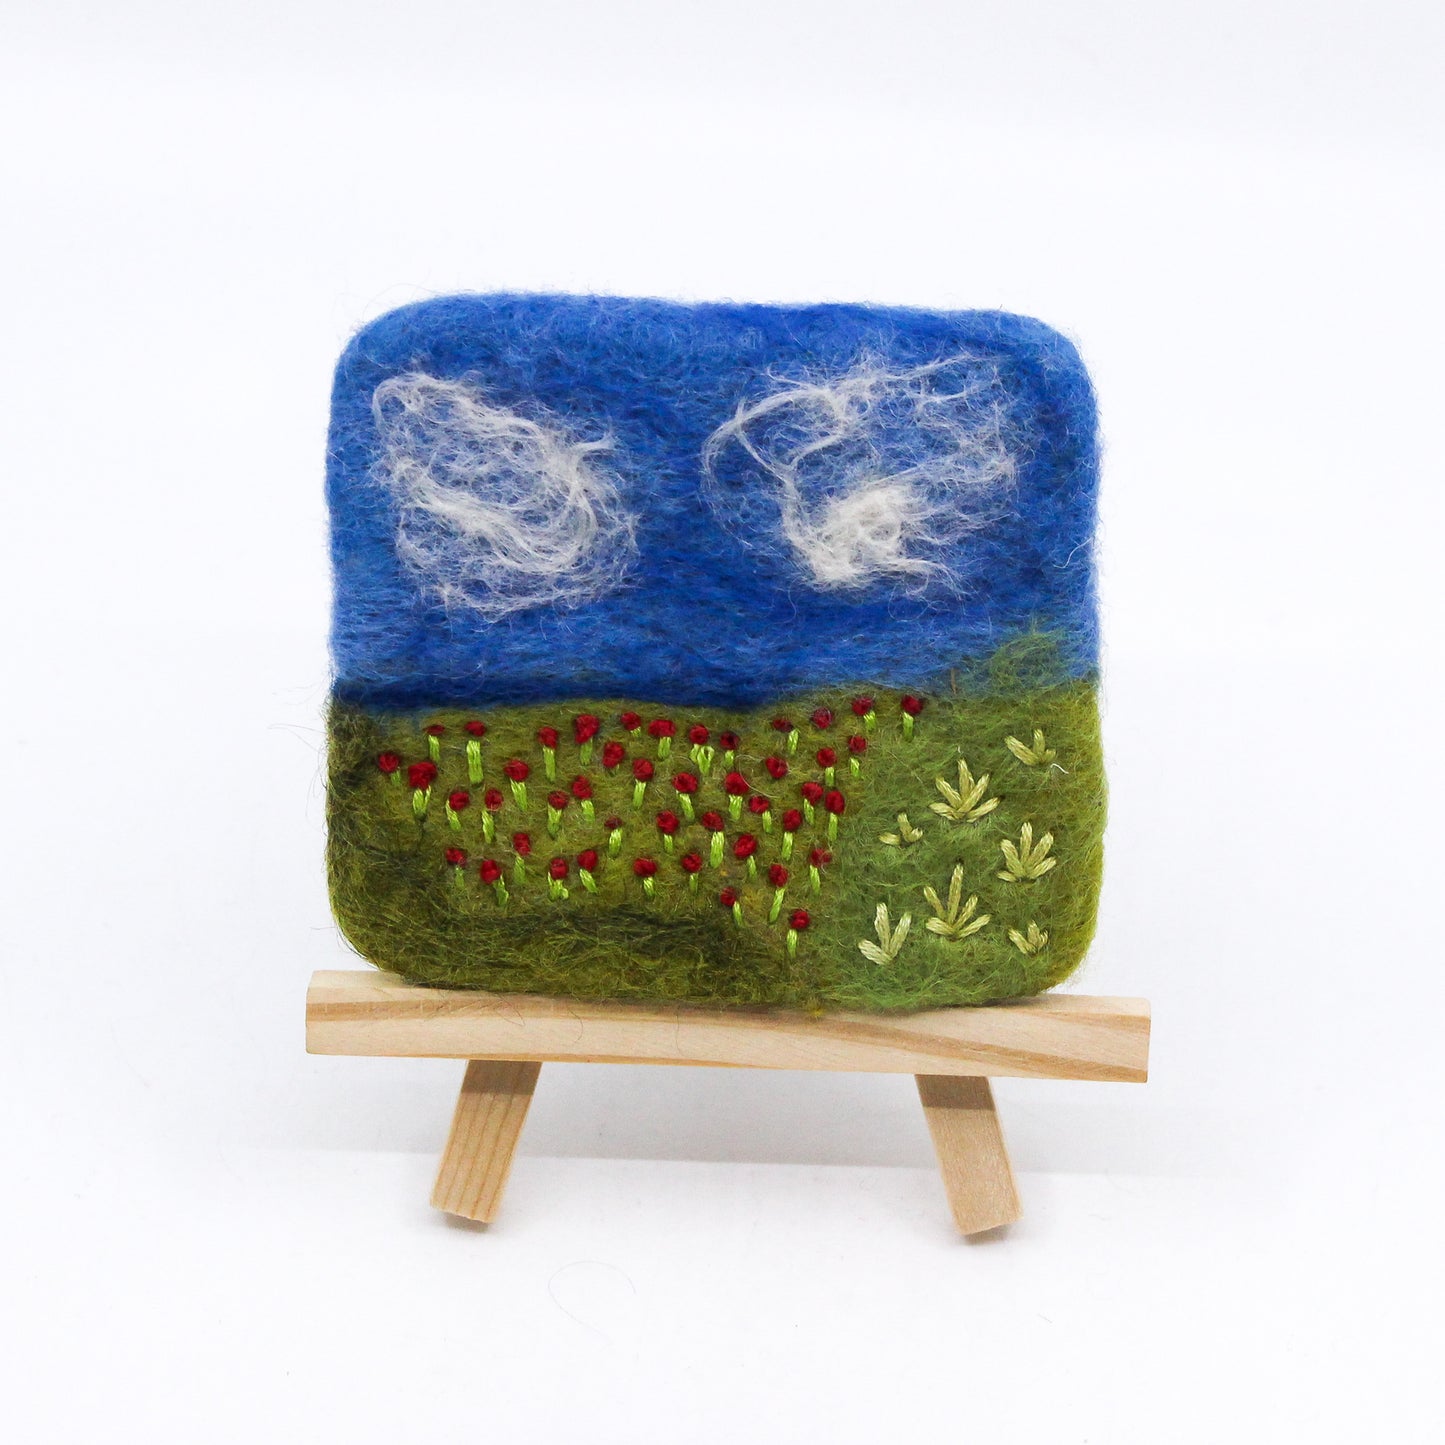 Felted Landscape with Flowers